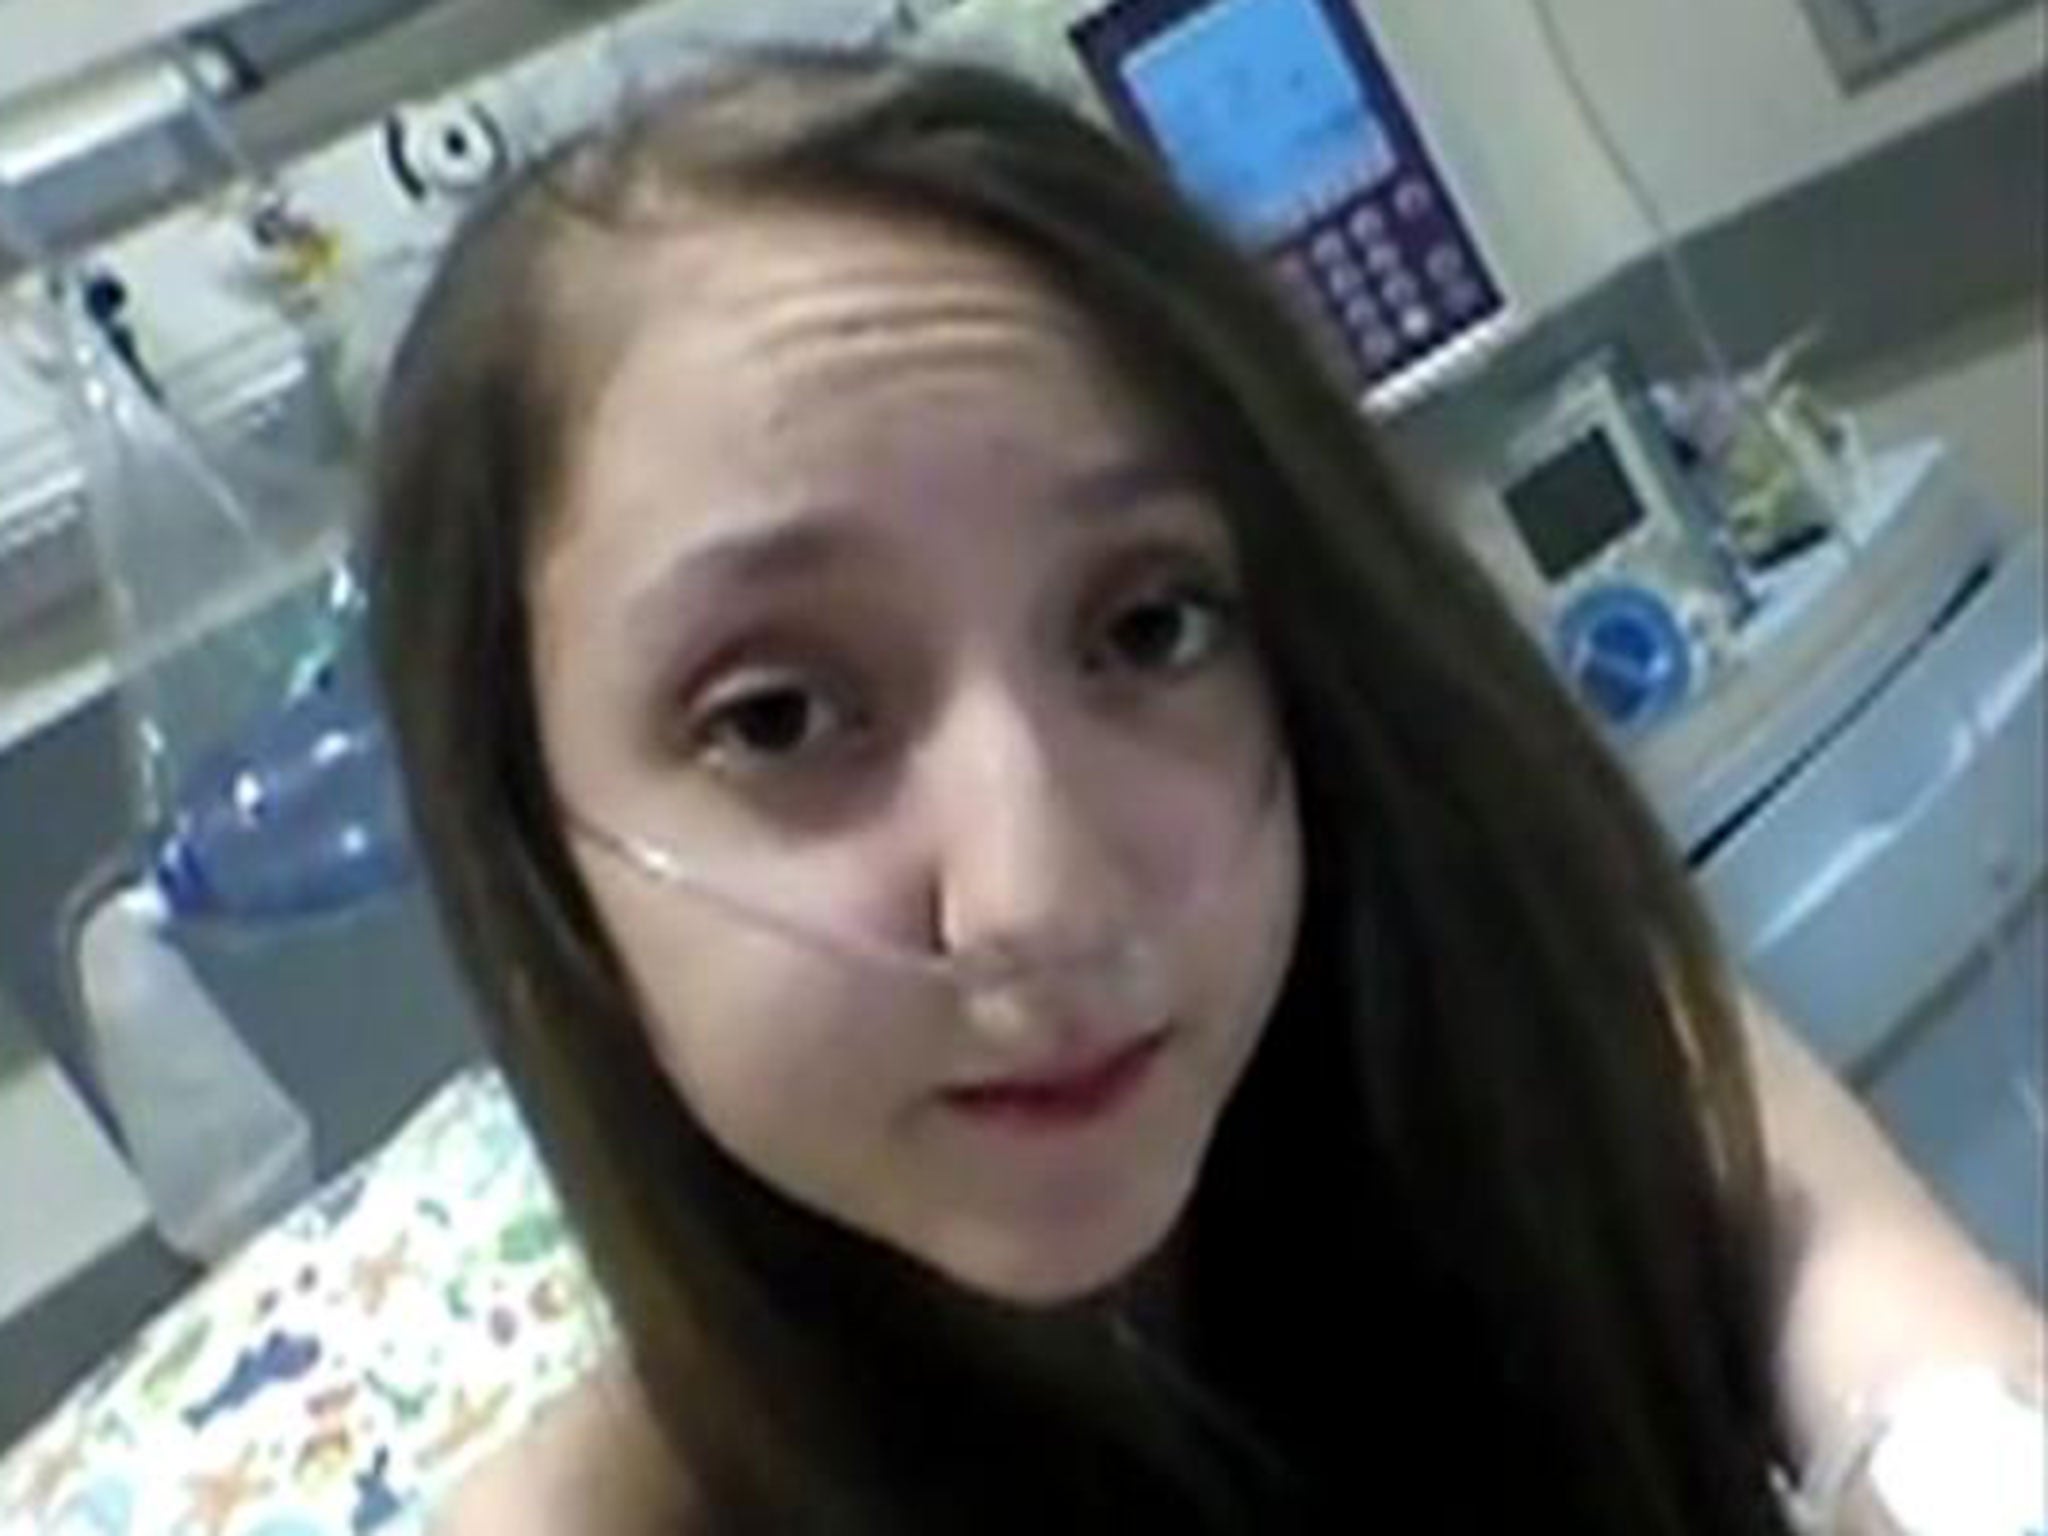 Chile Refuses 14 Year Old Girls Plea To Be Allowed To Die Because Of Cystic Fibrosis Struggle 